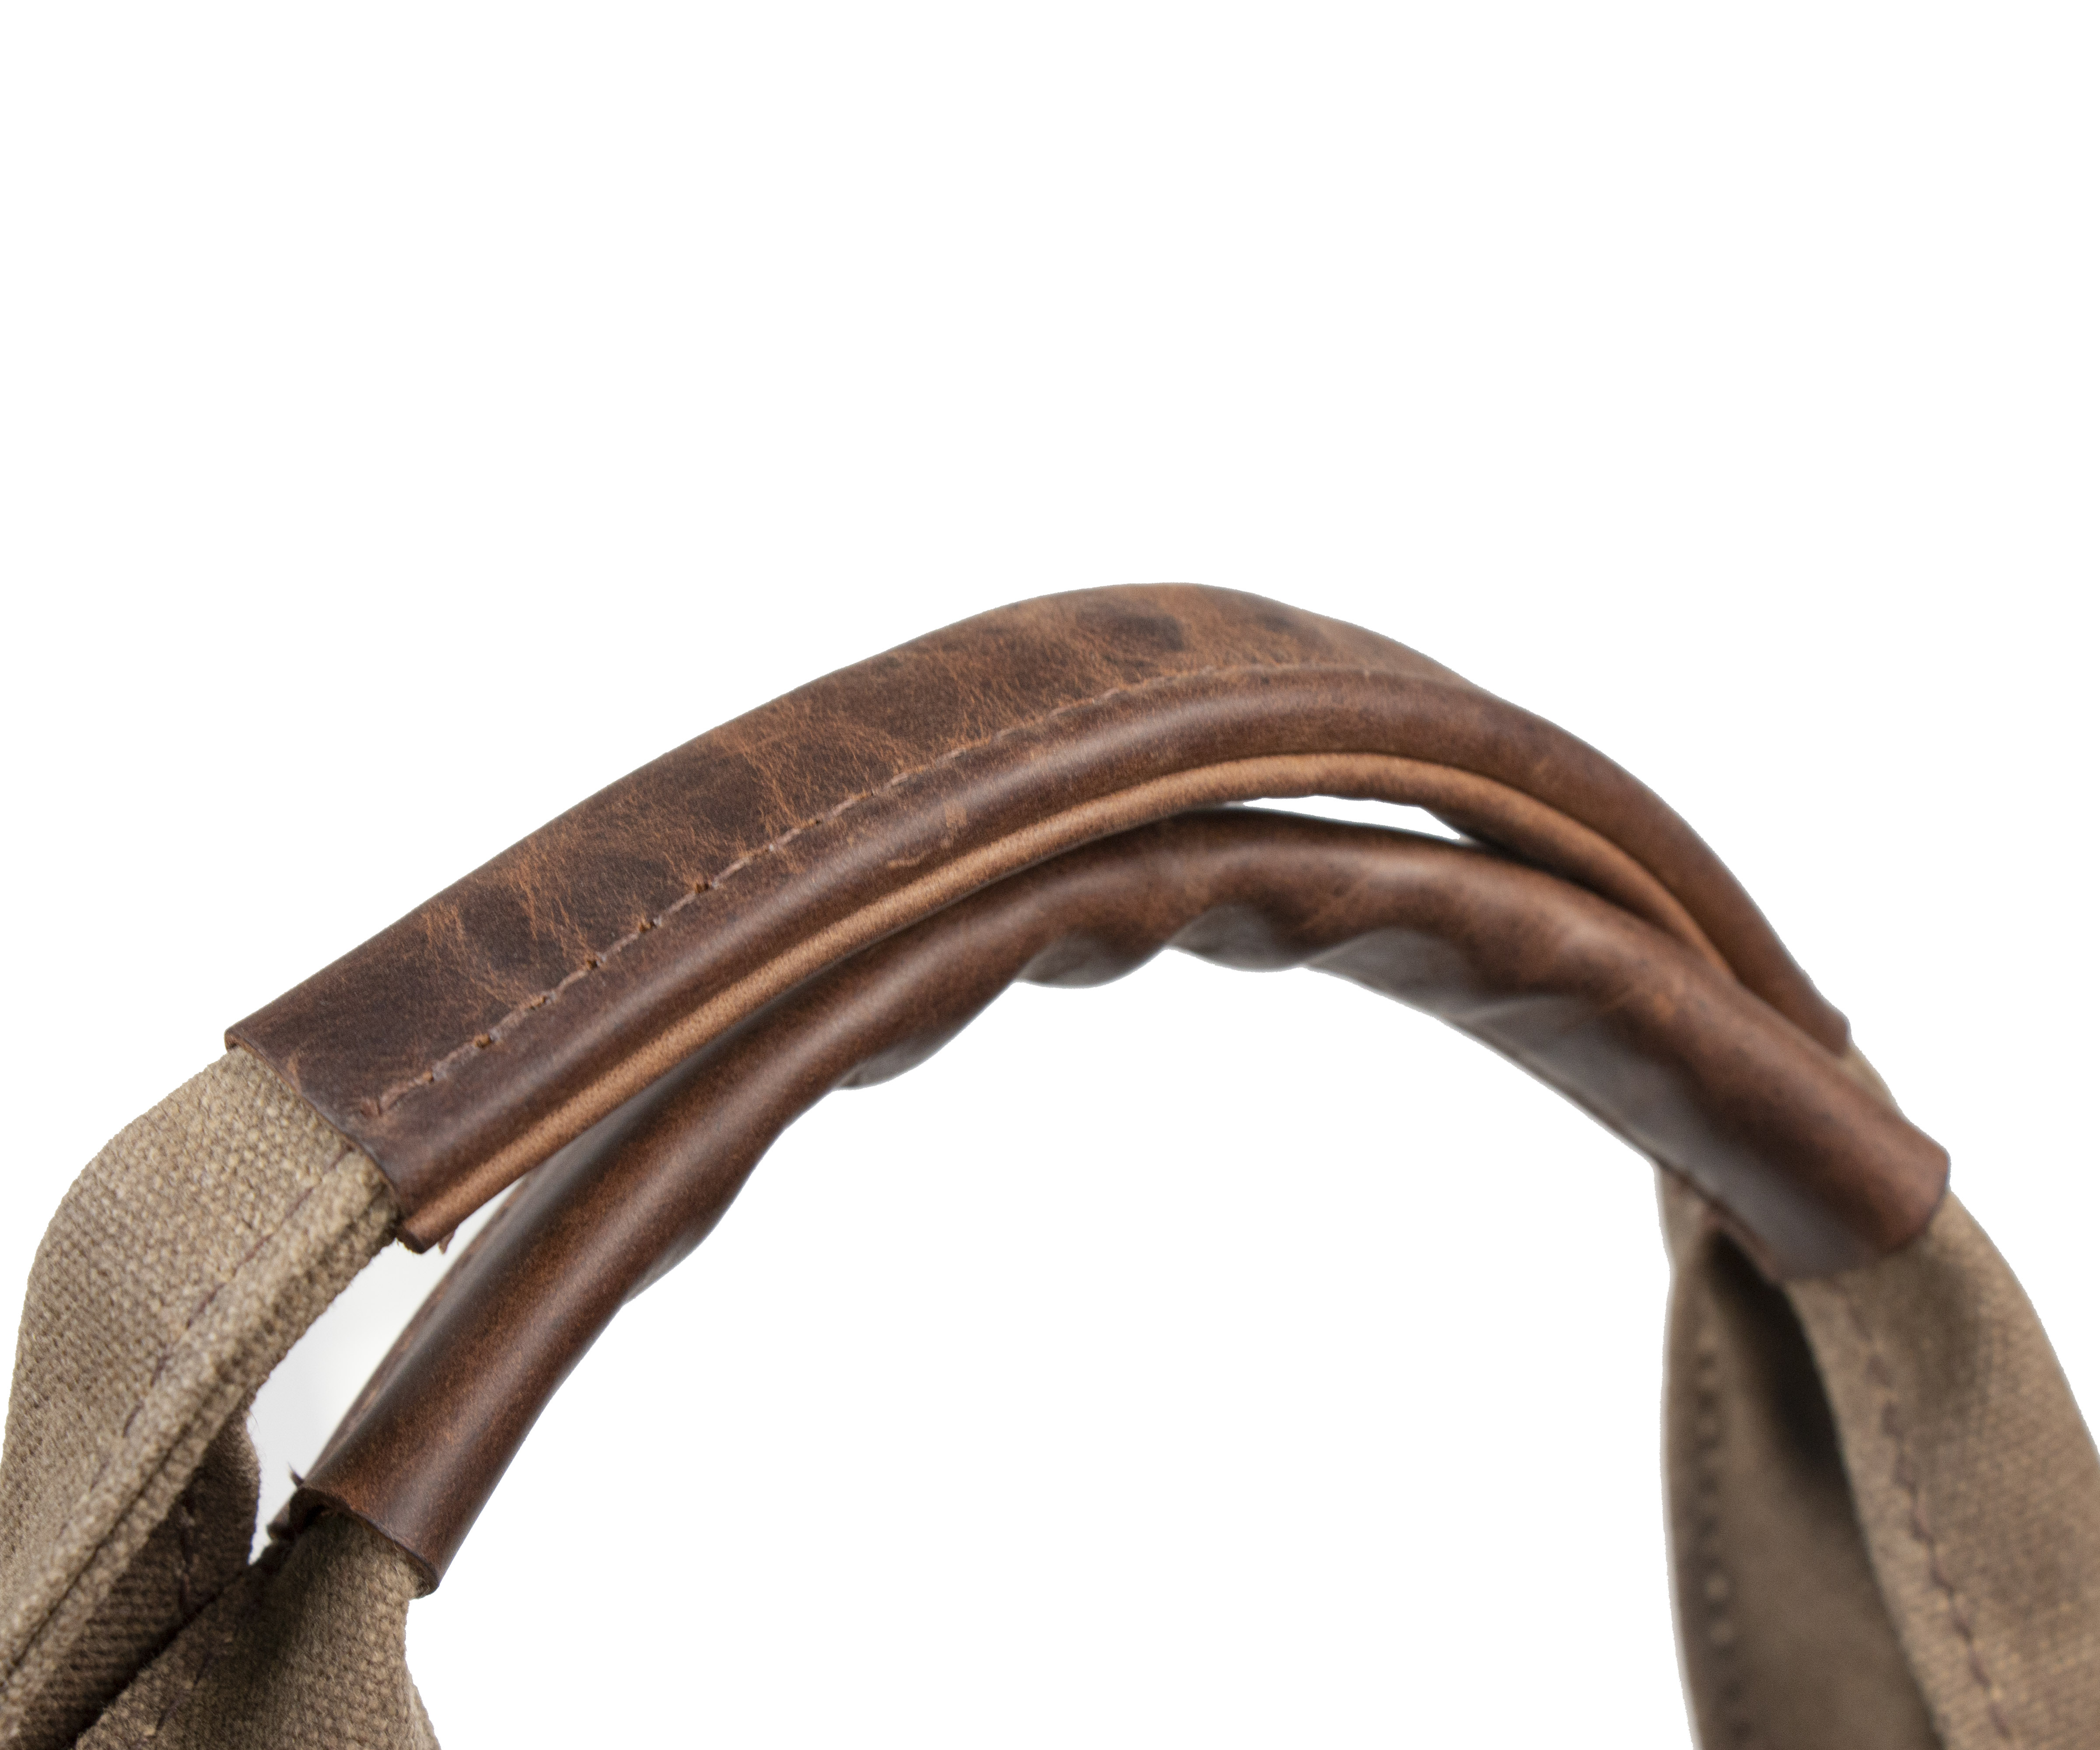 Handles lined with full-grain distressed leather